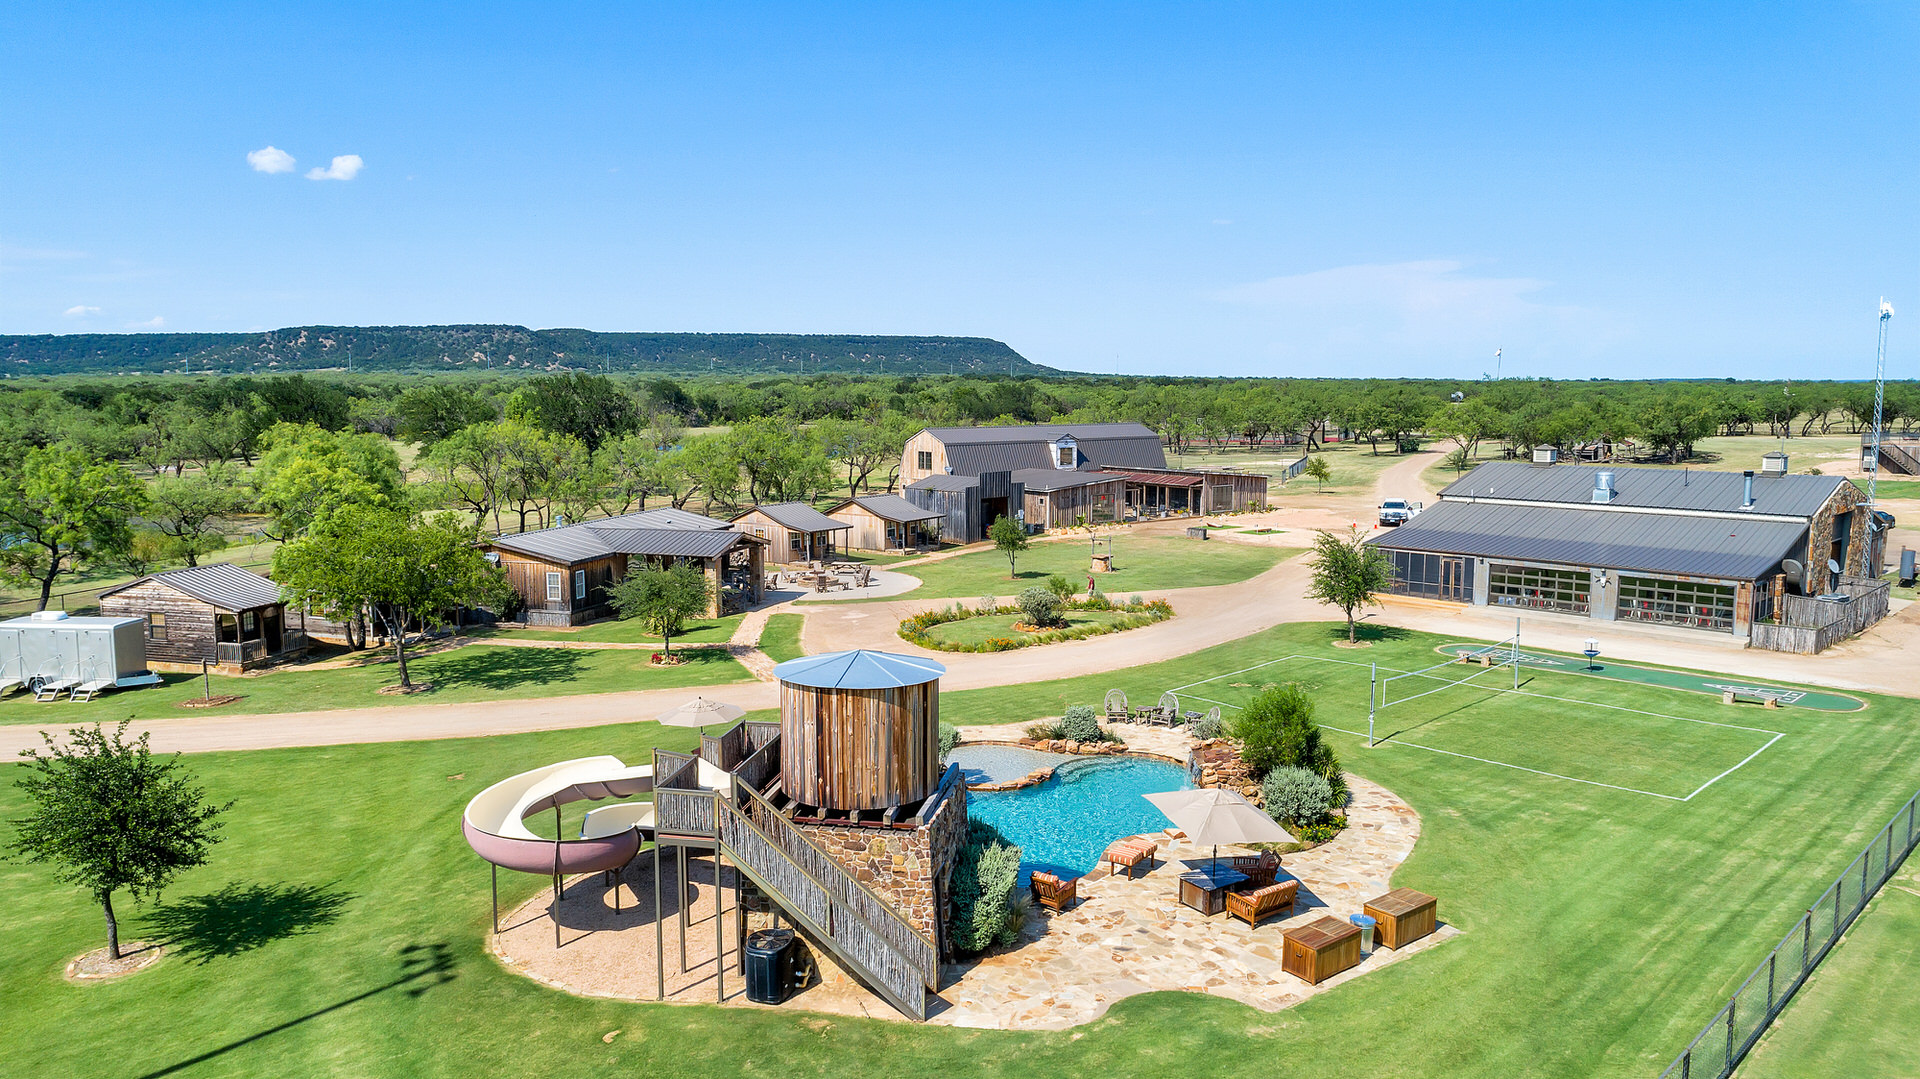 Live like a Texas luxury ranch owner (if only for a weekend) .